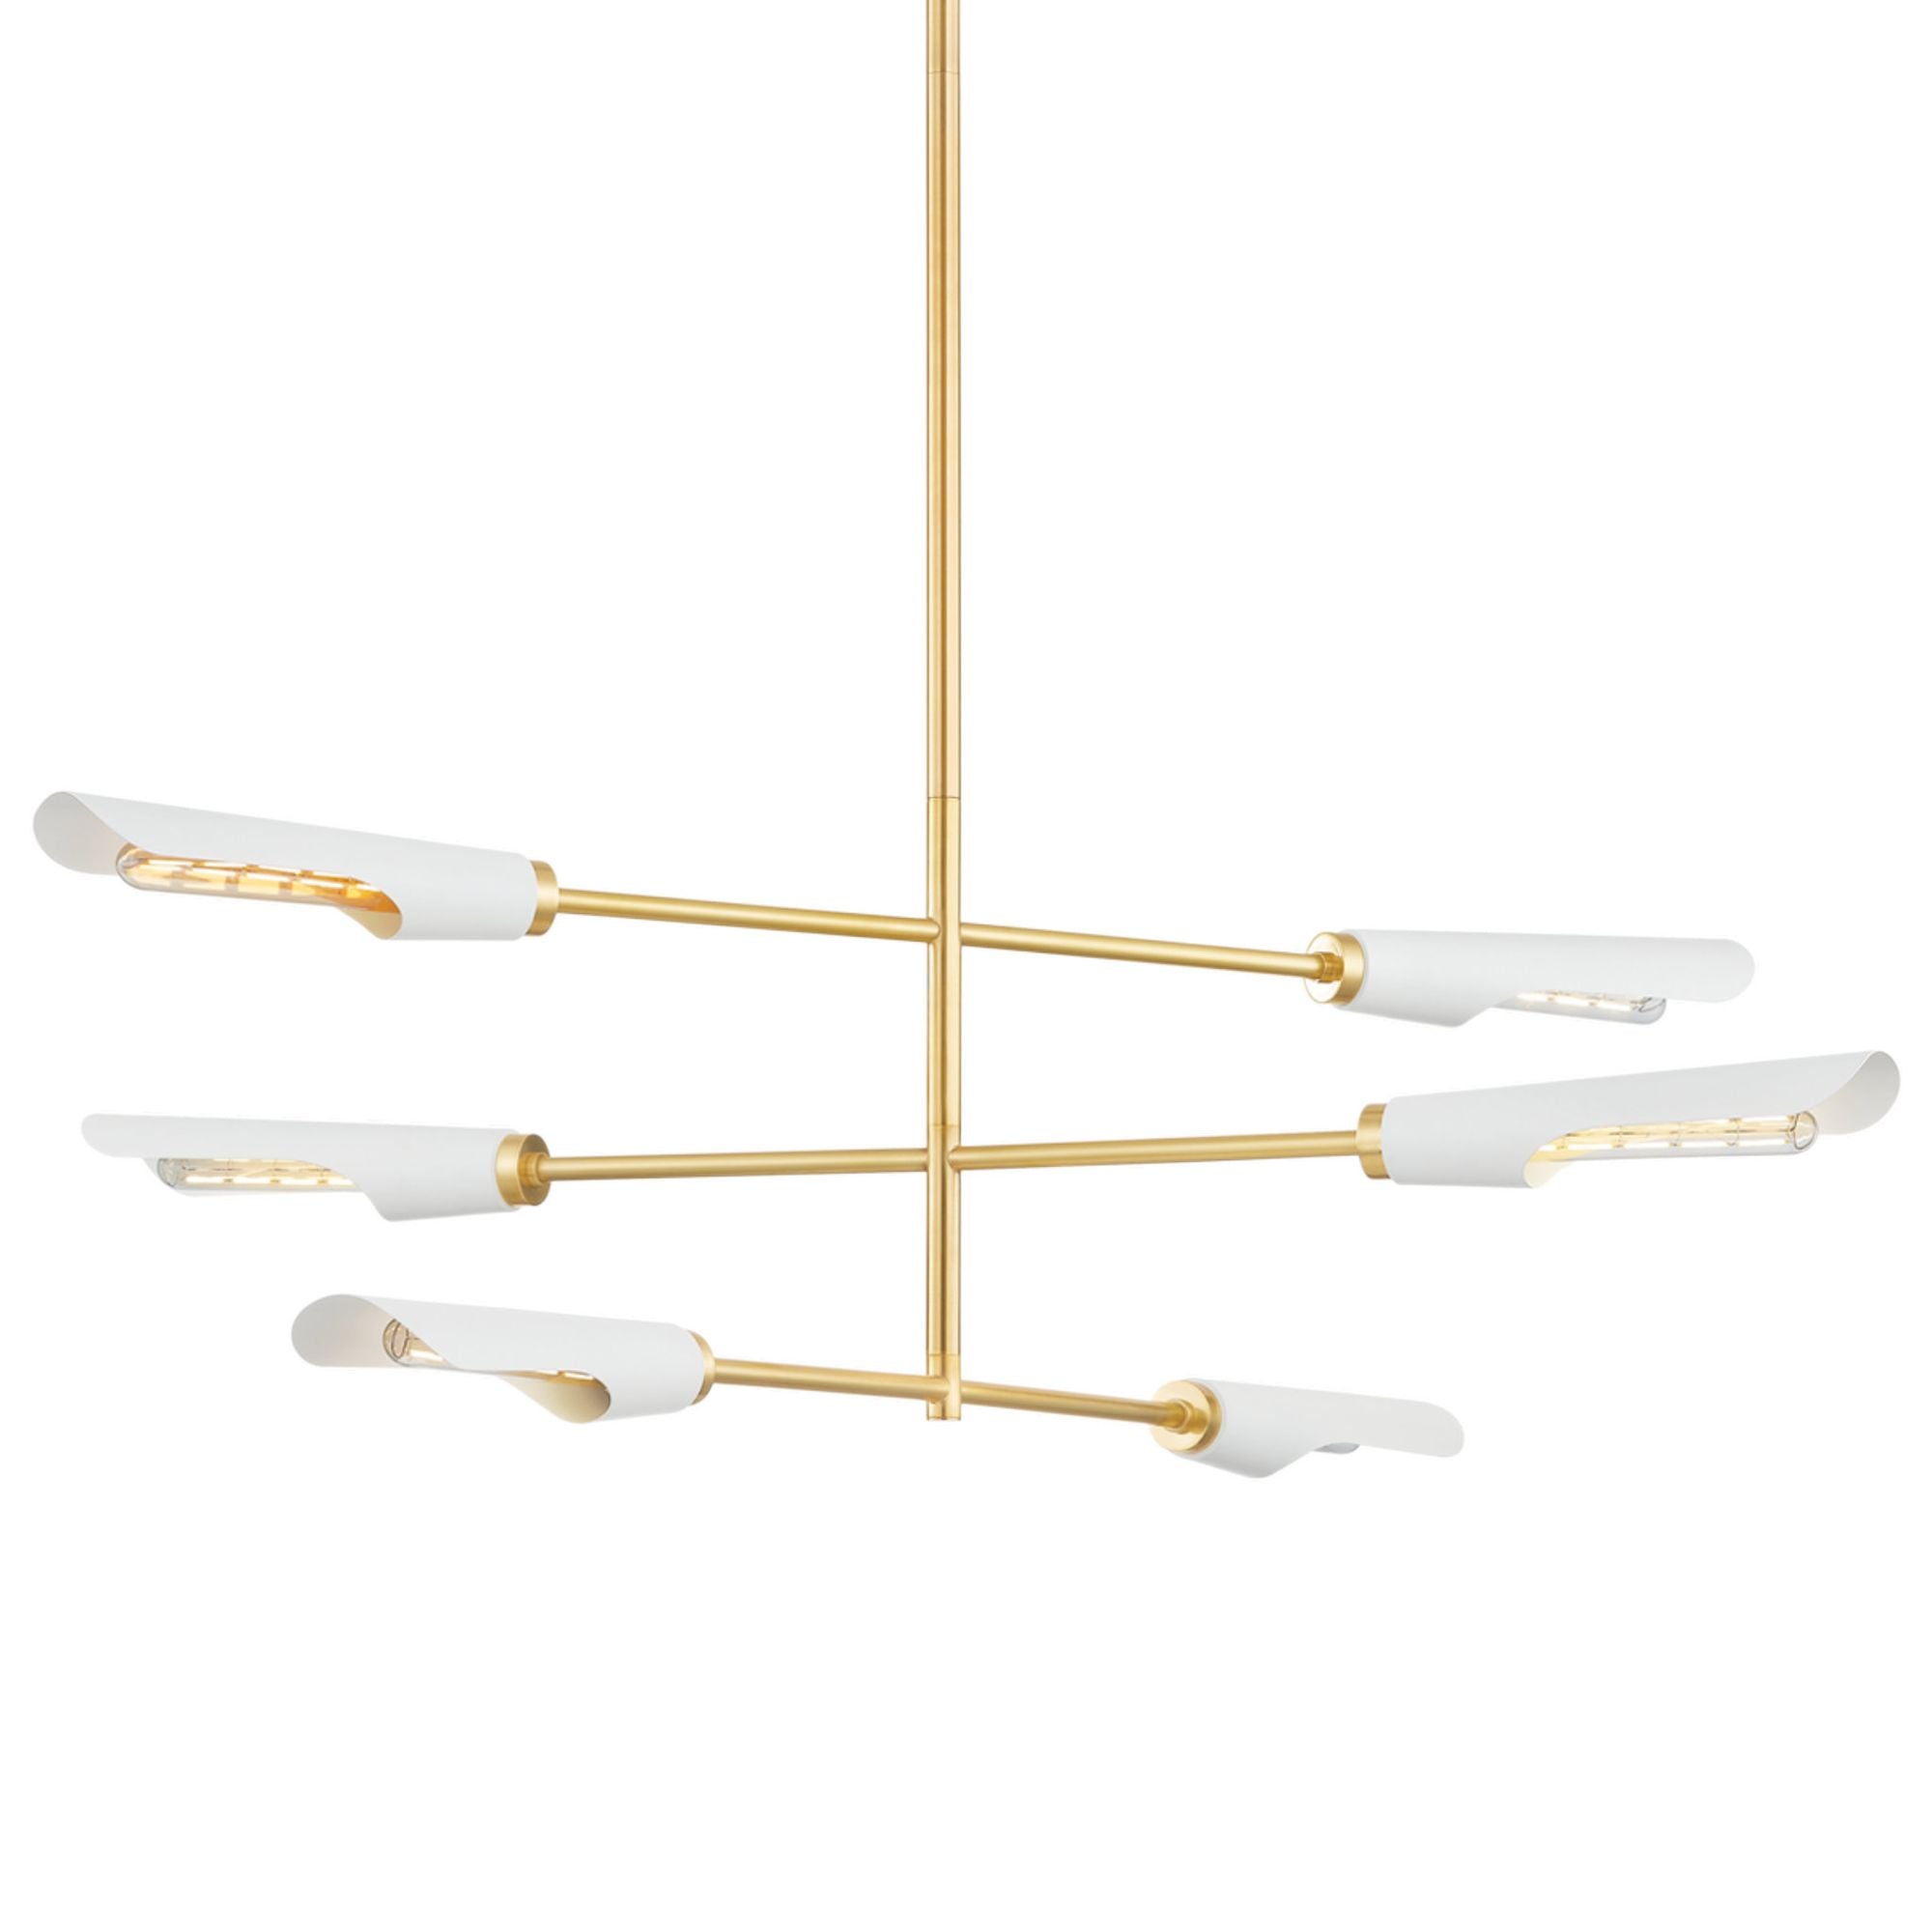 Harperrose 6-Light Chandelier in Aged Brass/Soft White by The Lifestyled Co